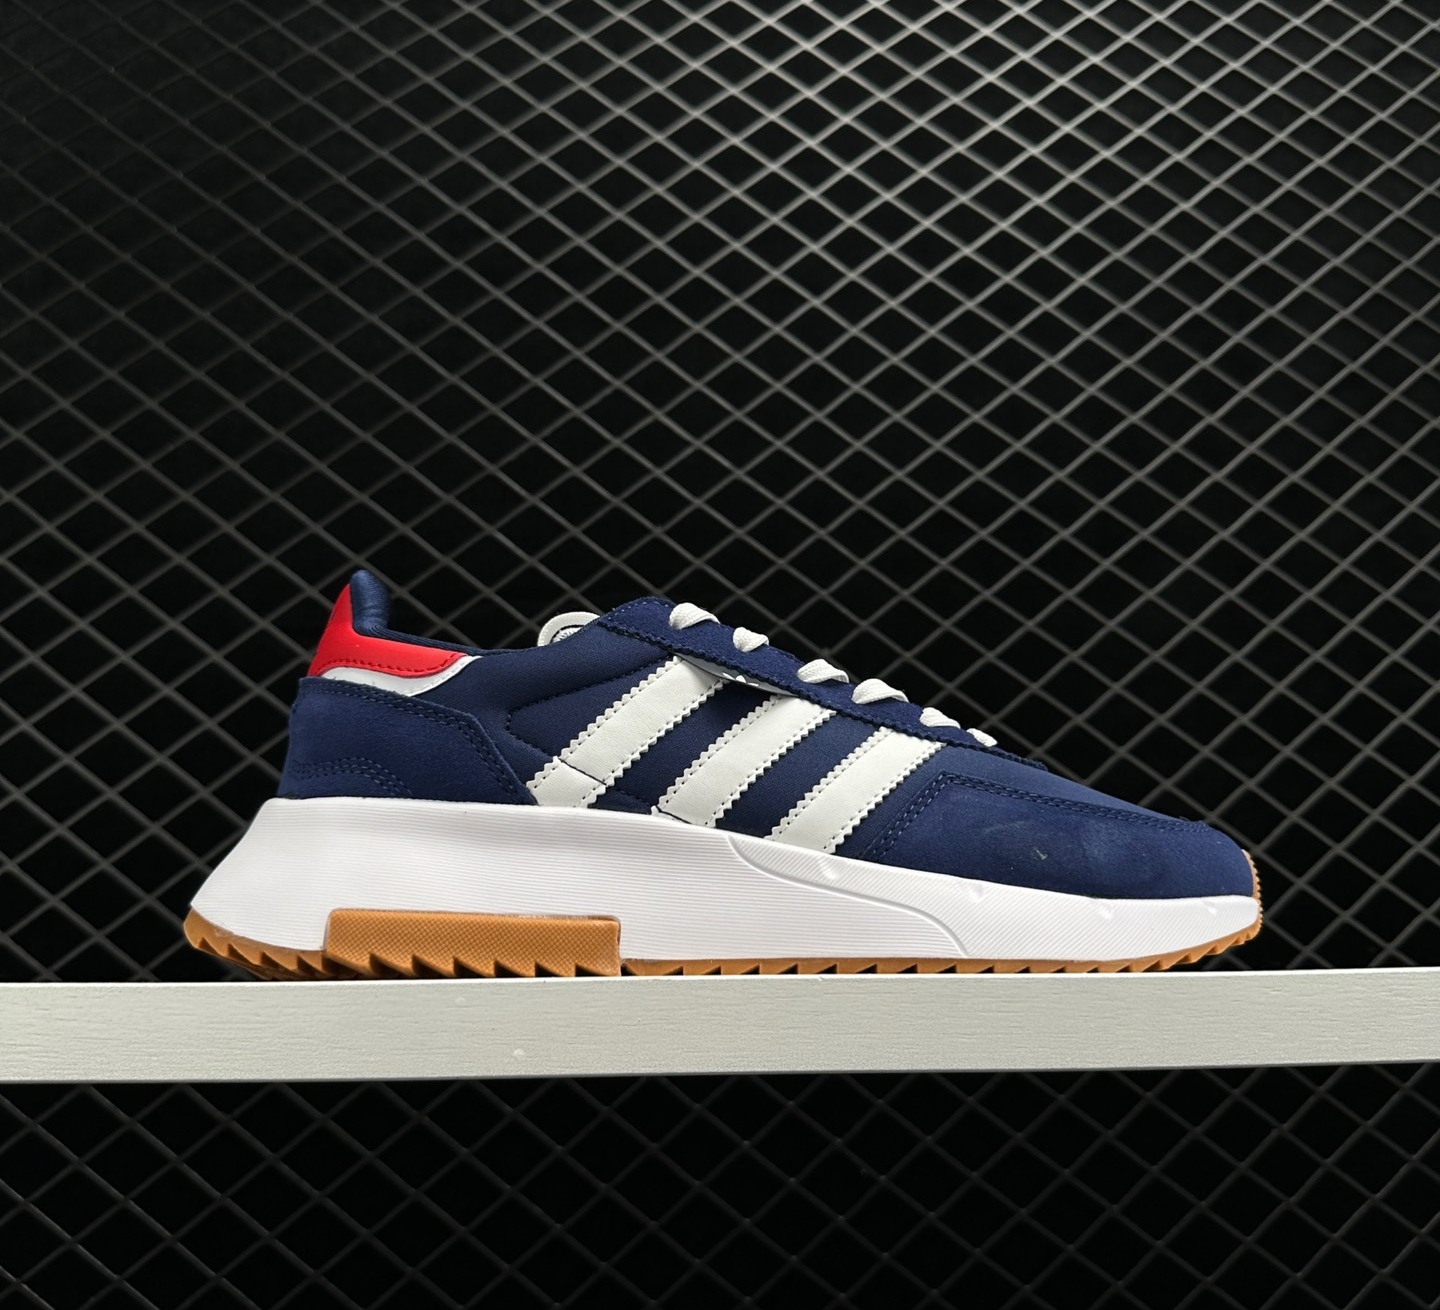 Adidas Retropy F2 Legend Ink Gum: Retro Style Sneakers with a Vintage Vibe